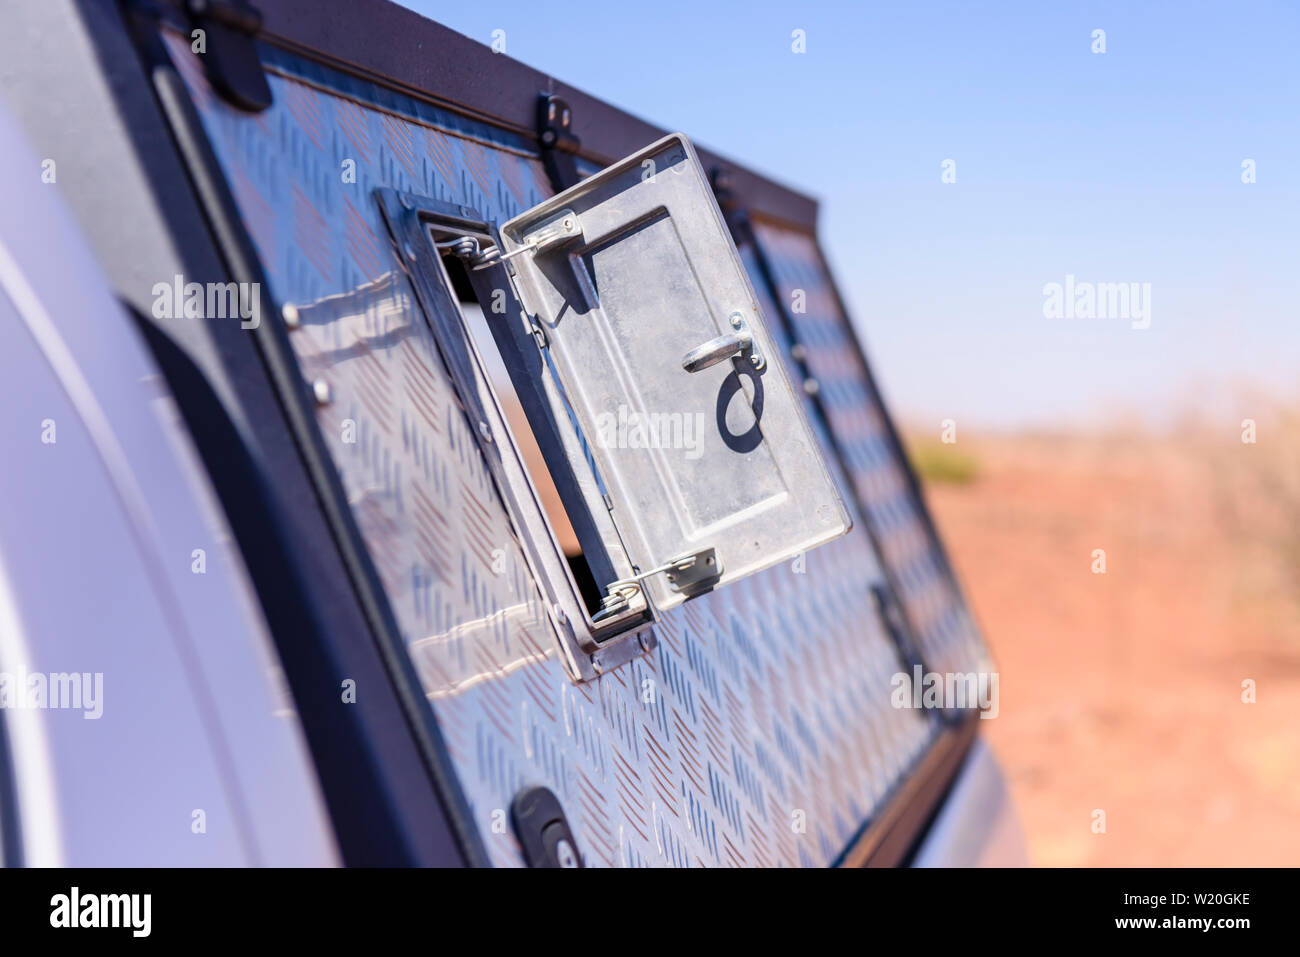 Flap on the side of a pick-up truck canopy, which should be opened when driving on dusty roads to prevent dust being sucked inside. Stock Photo